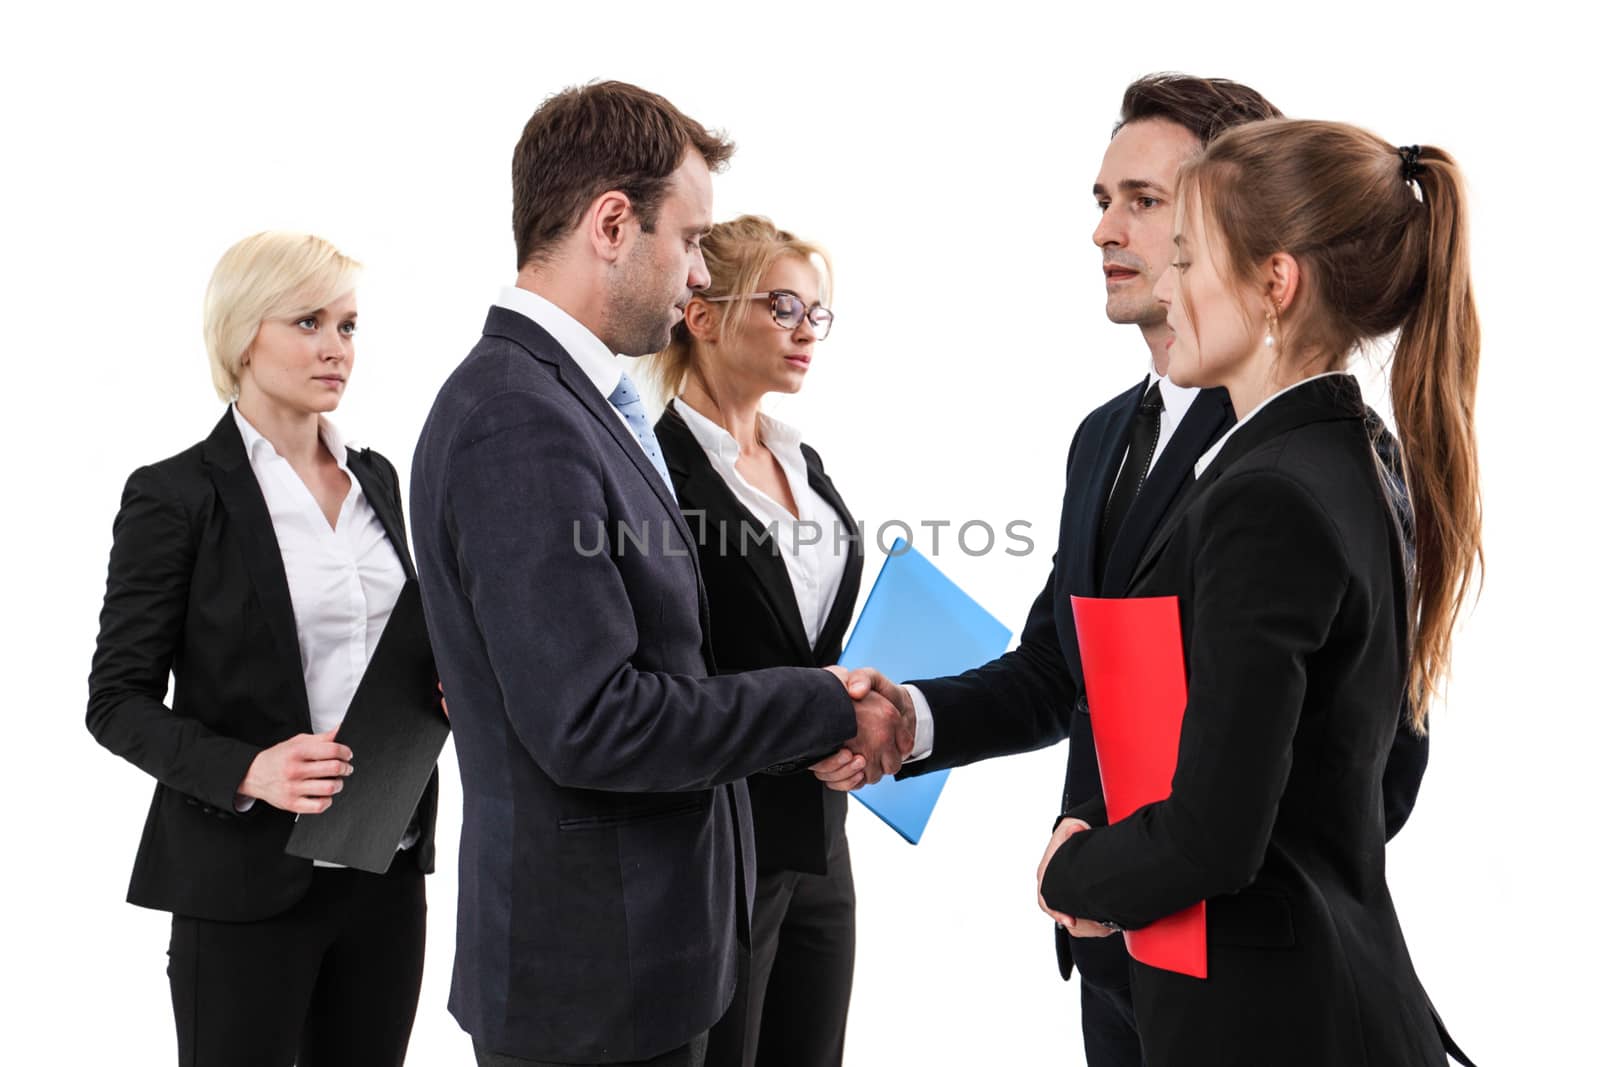 Business people shaking hands, finishing up a meeting, isolated on white background